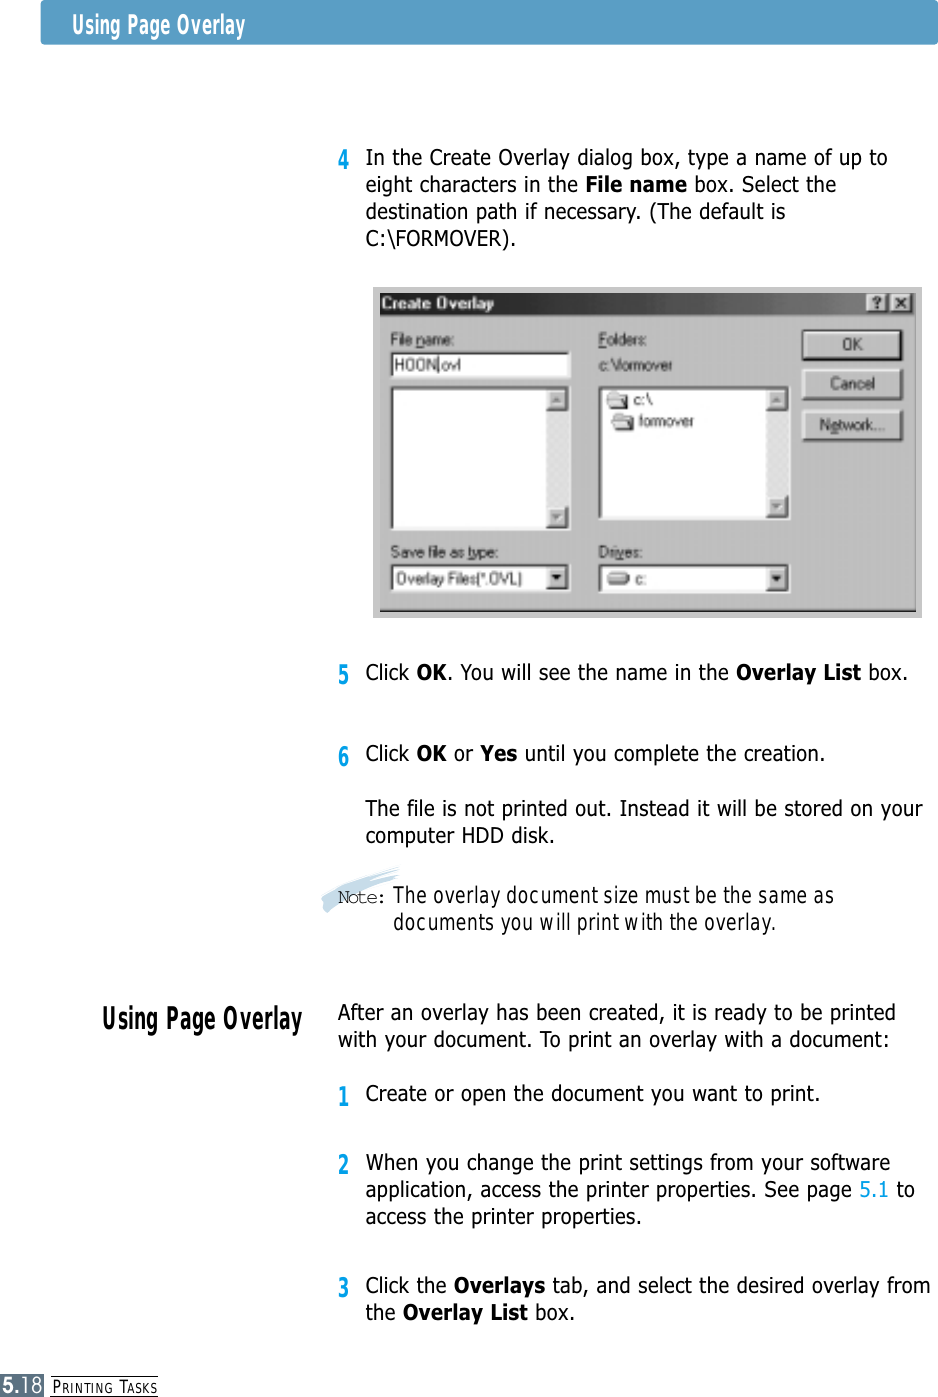 PRINTING TASKS5.184In the Create Overlay dialog box, type a name of up toeight characters in the File name box. Select thedestination path if necessary. (The default isC:\FORMOVER).5Click OK. You will see the name in the Overlay List box.6Click OK or Yes until you complete the creation. The file is not printed out. Instead it will be stored on yourcomputer HDD disk. Note: The overlay document size must be the same asdocuments you will print with the overlay.Using Page OverlayAfter an overlay has been created, it is ready to be printedwith your document. To print an overlay with a document:1Create or open the document you want to print. 2When you change the print settings from your softwareapplication, access the printer properties. See page 5.1 toaccess the printer properties.3Click the Overlays tab, and select the desired overlay fromthe Overlay List box. Using Page Overlay